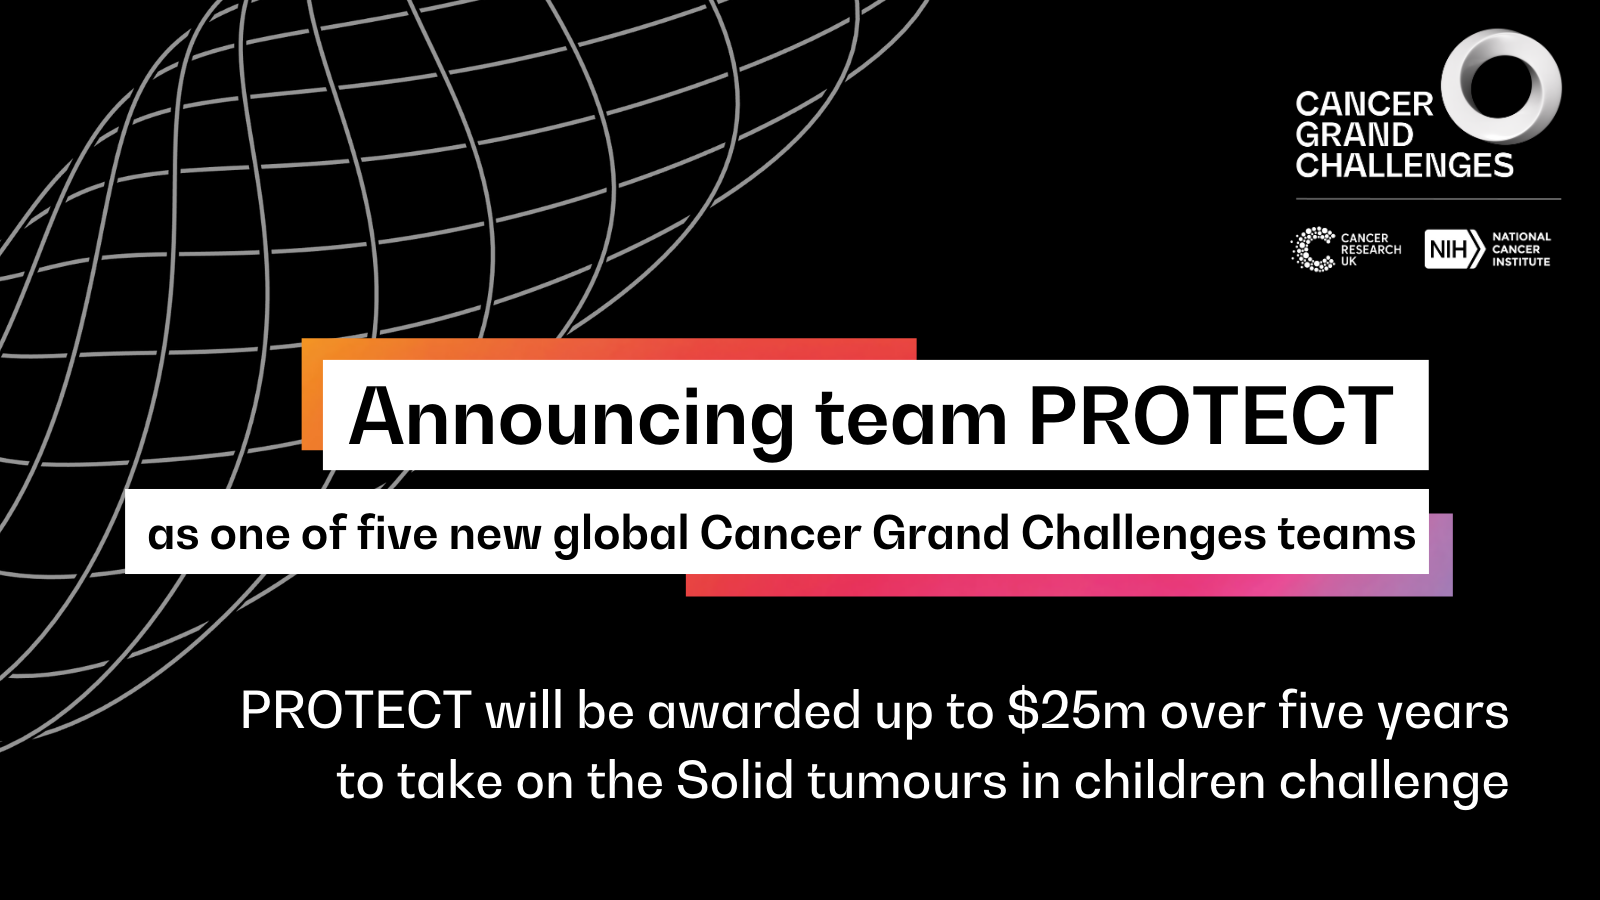 Black background with text: Announcing team PROTECT as one of five new global Cancer Grand Challenges teams. PROTECT will be awarded up to $25m over five years to tkae on the Solid tumours in children challenges. Logo of Cancer Grand Challenges and Cancer Research UK and National Cancer Institute in top right corner.